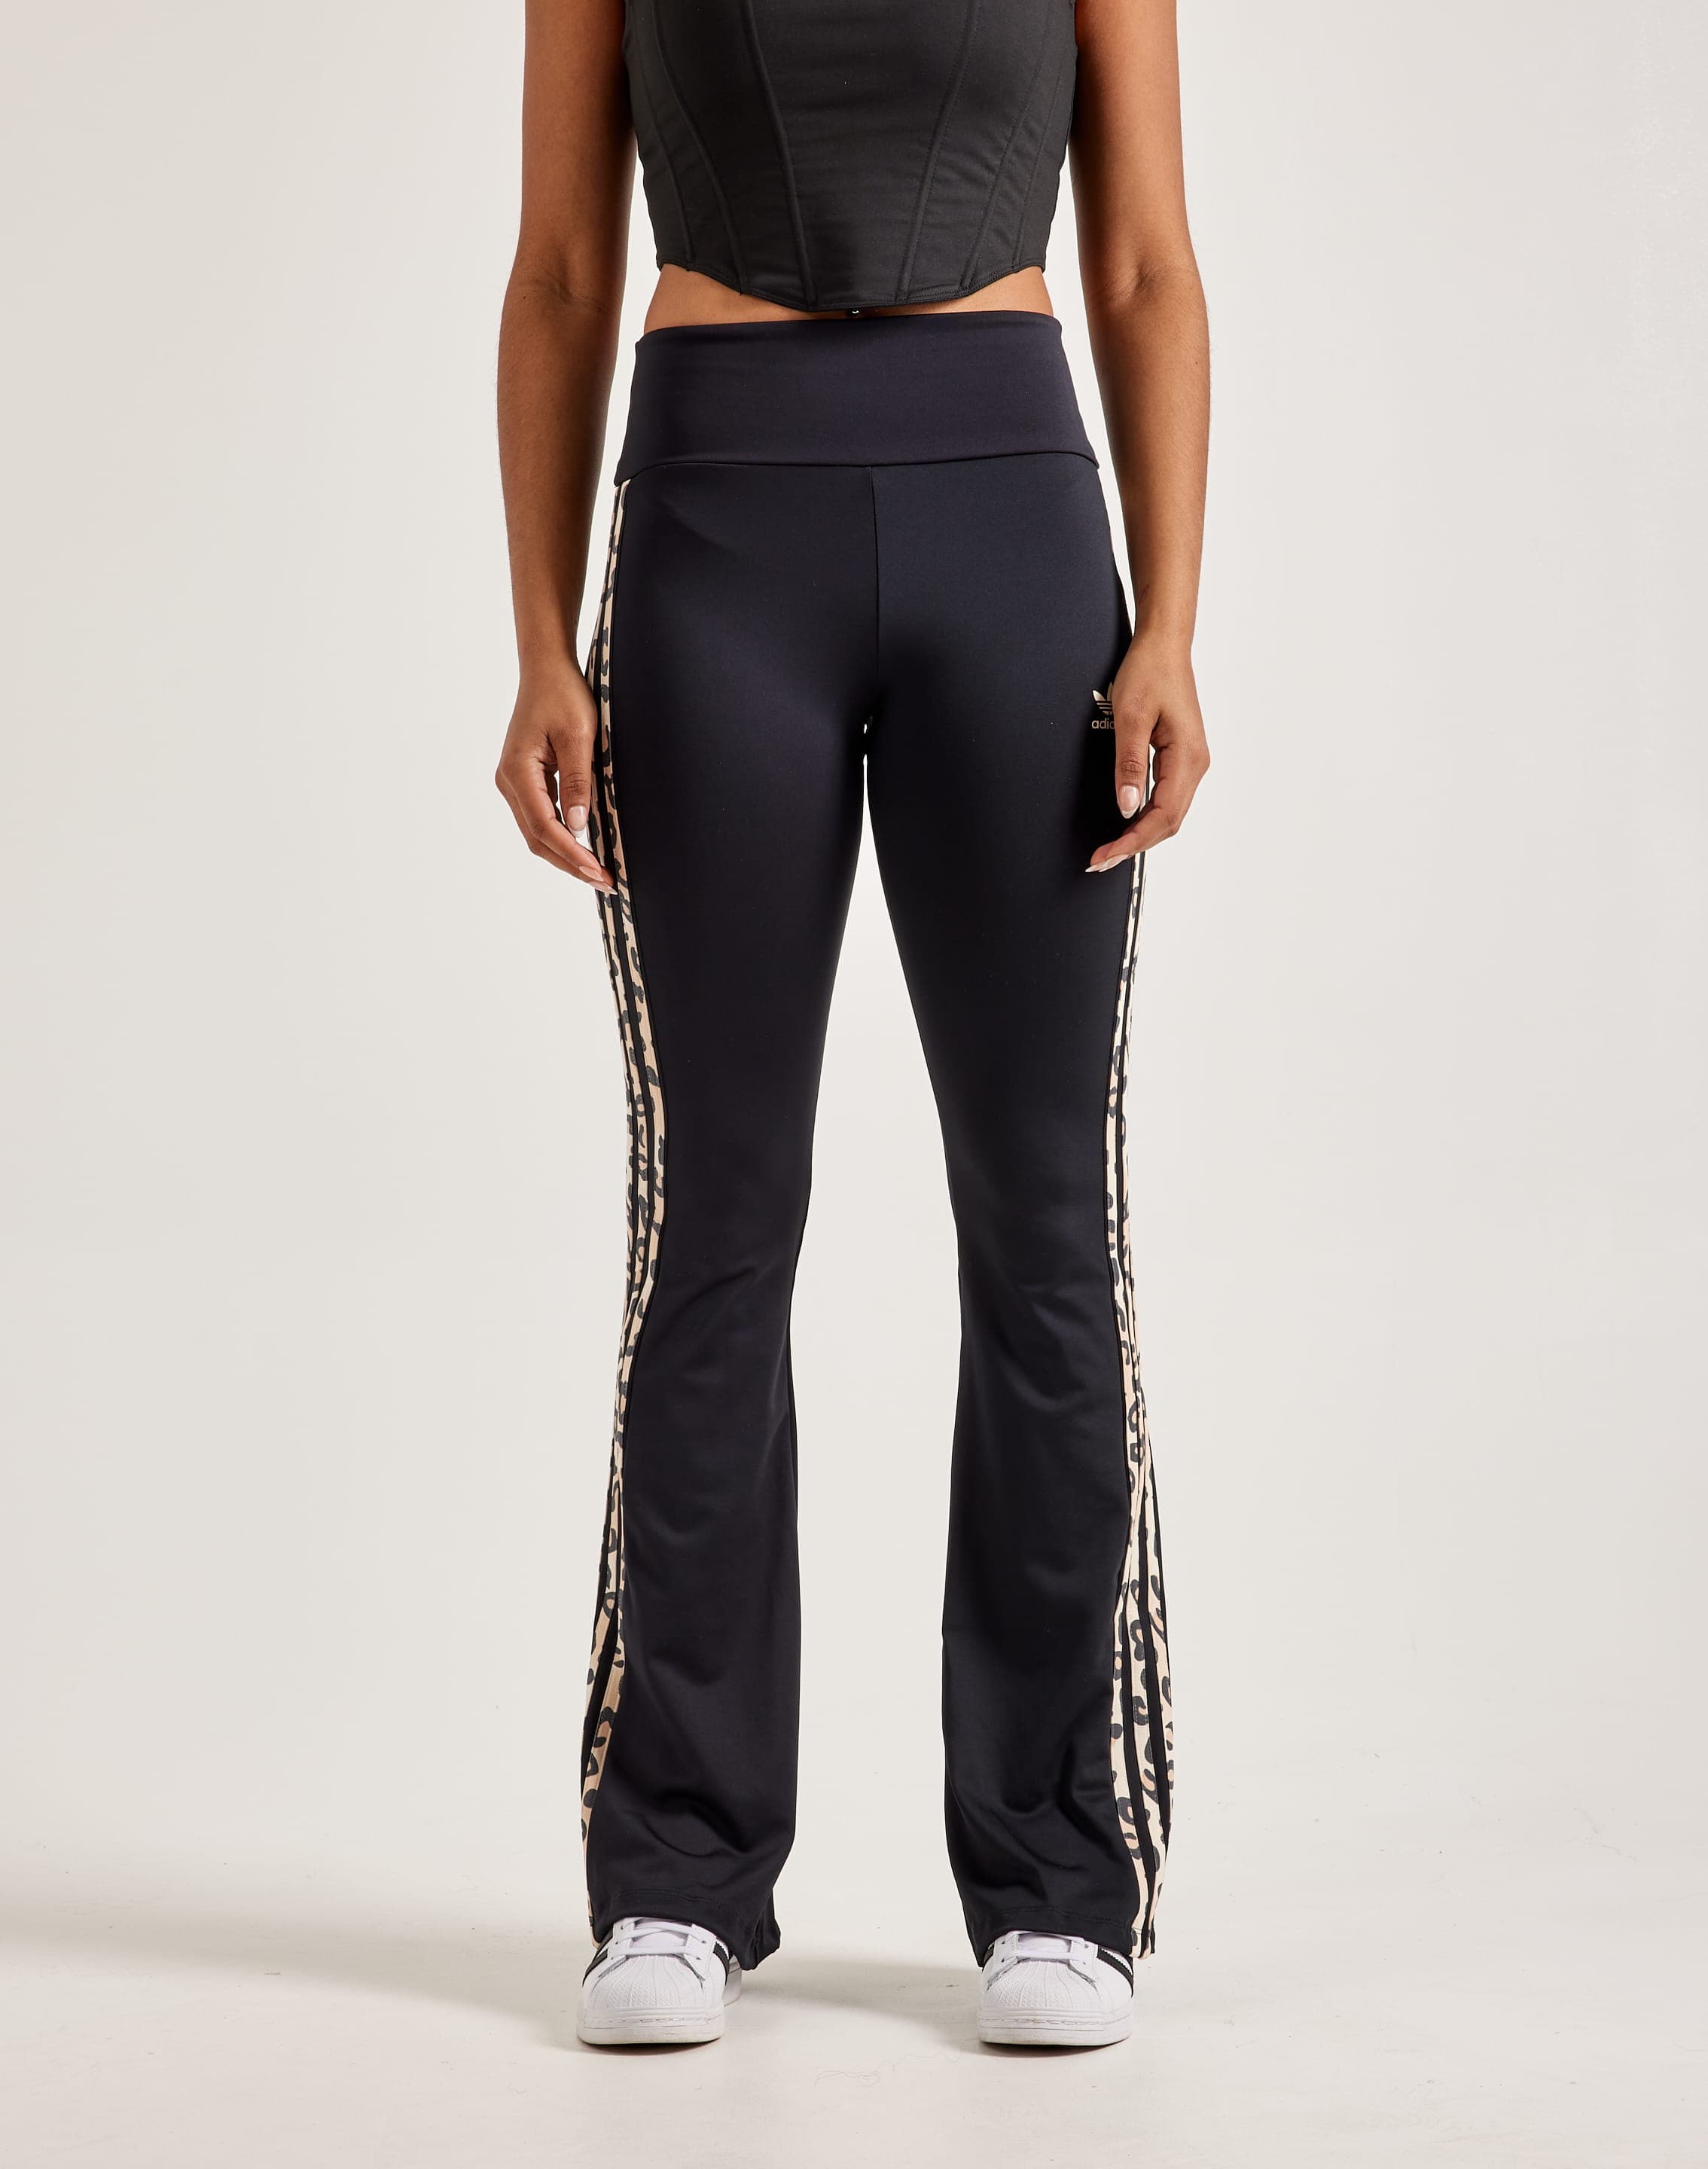 Adidas Leopard Luxe 3-Stripes Flared Leggings – DTLR